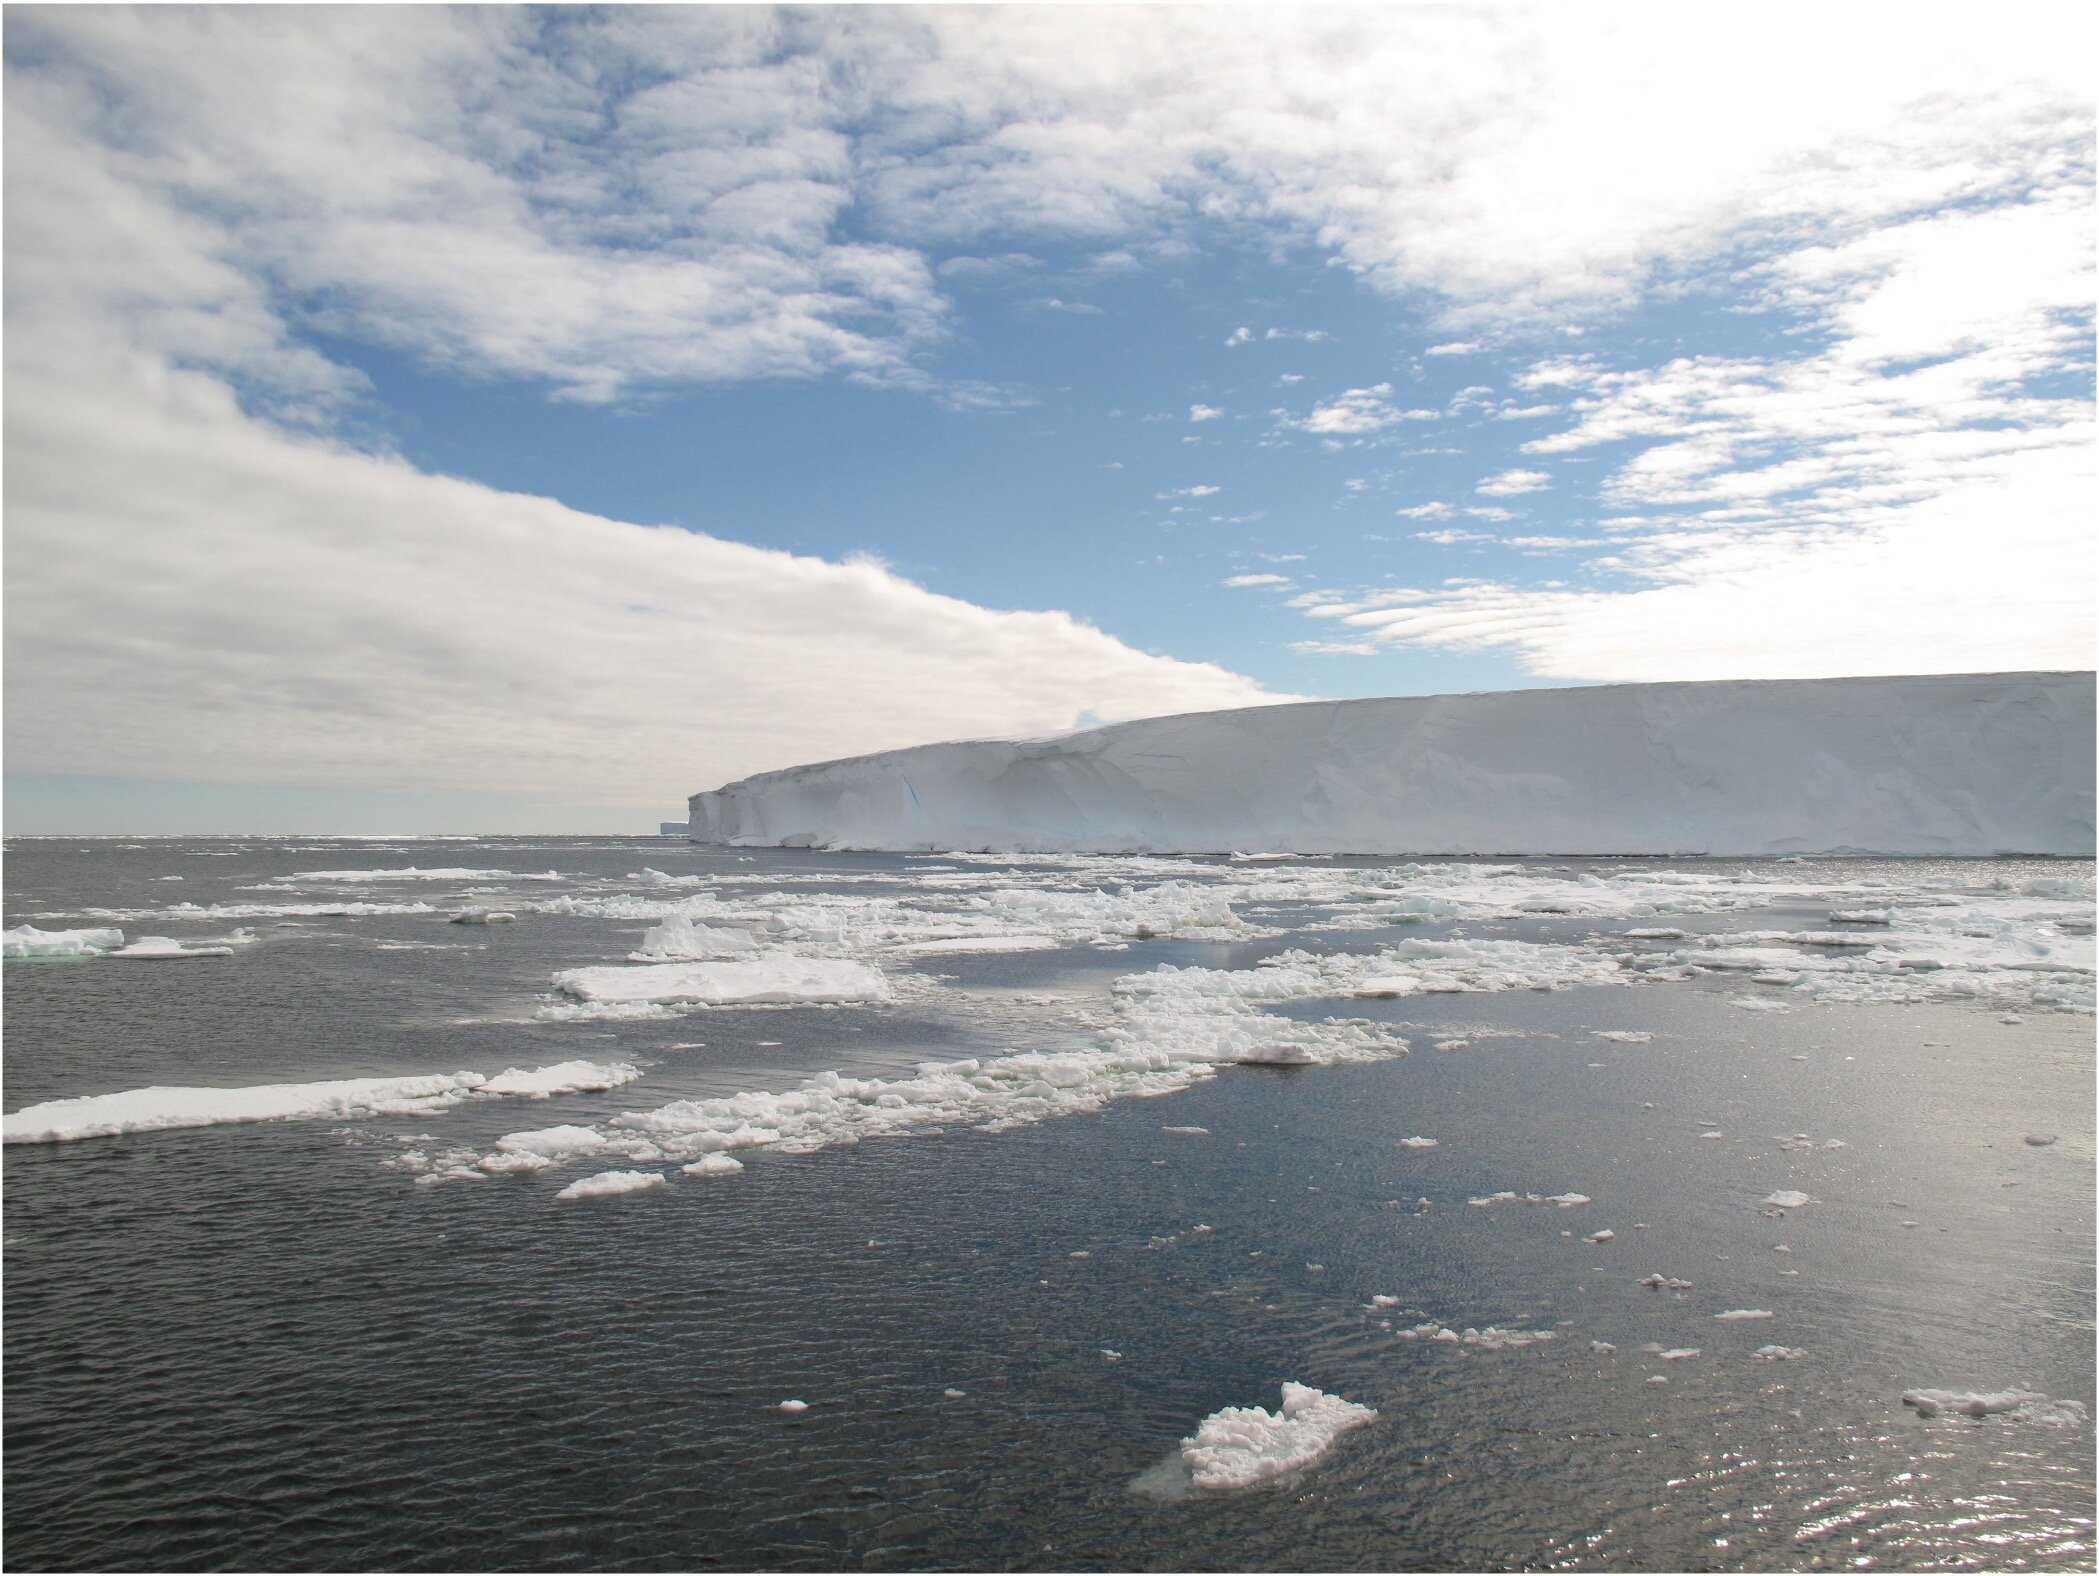 Adaptability of vitamin B12 in Antarctic algae has implications for climate change and life in the Southern Ocean